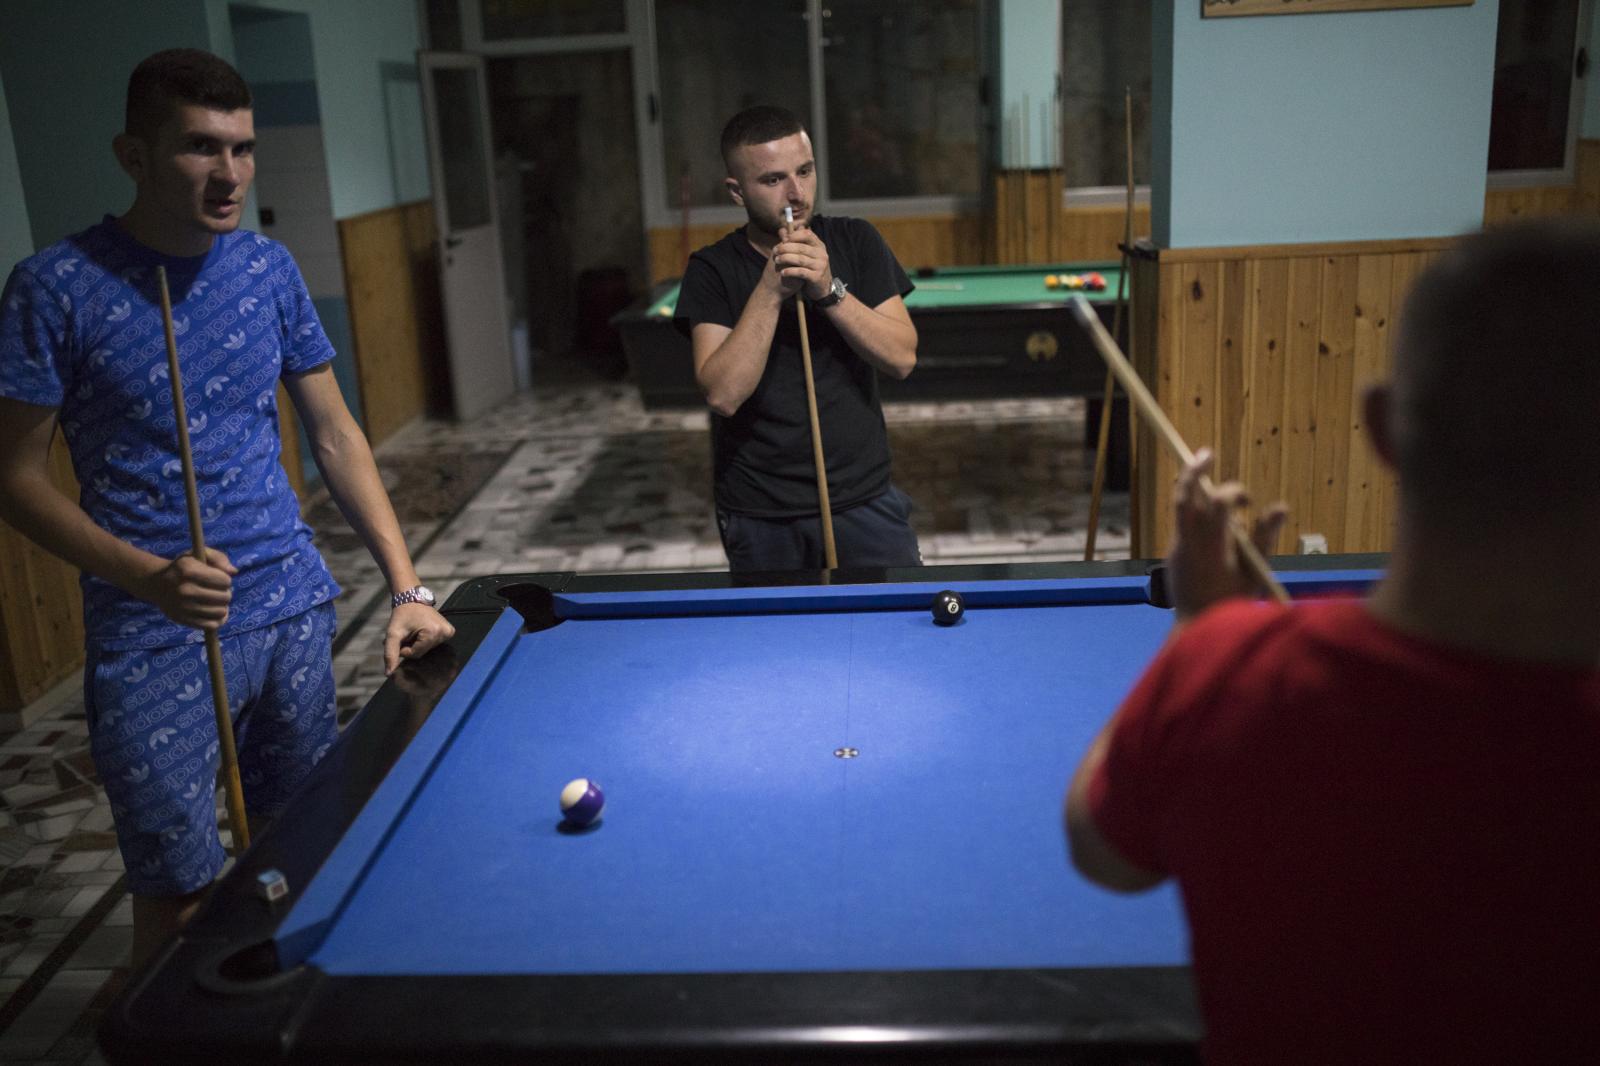 Albania Unemployment - Friends play pool at a leisure hall in the town of...